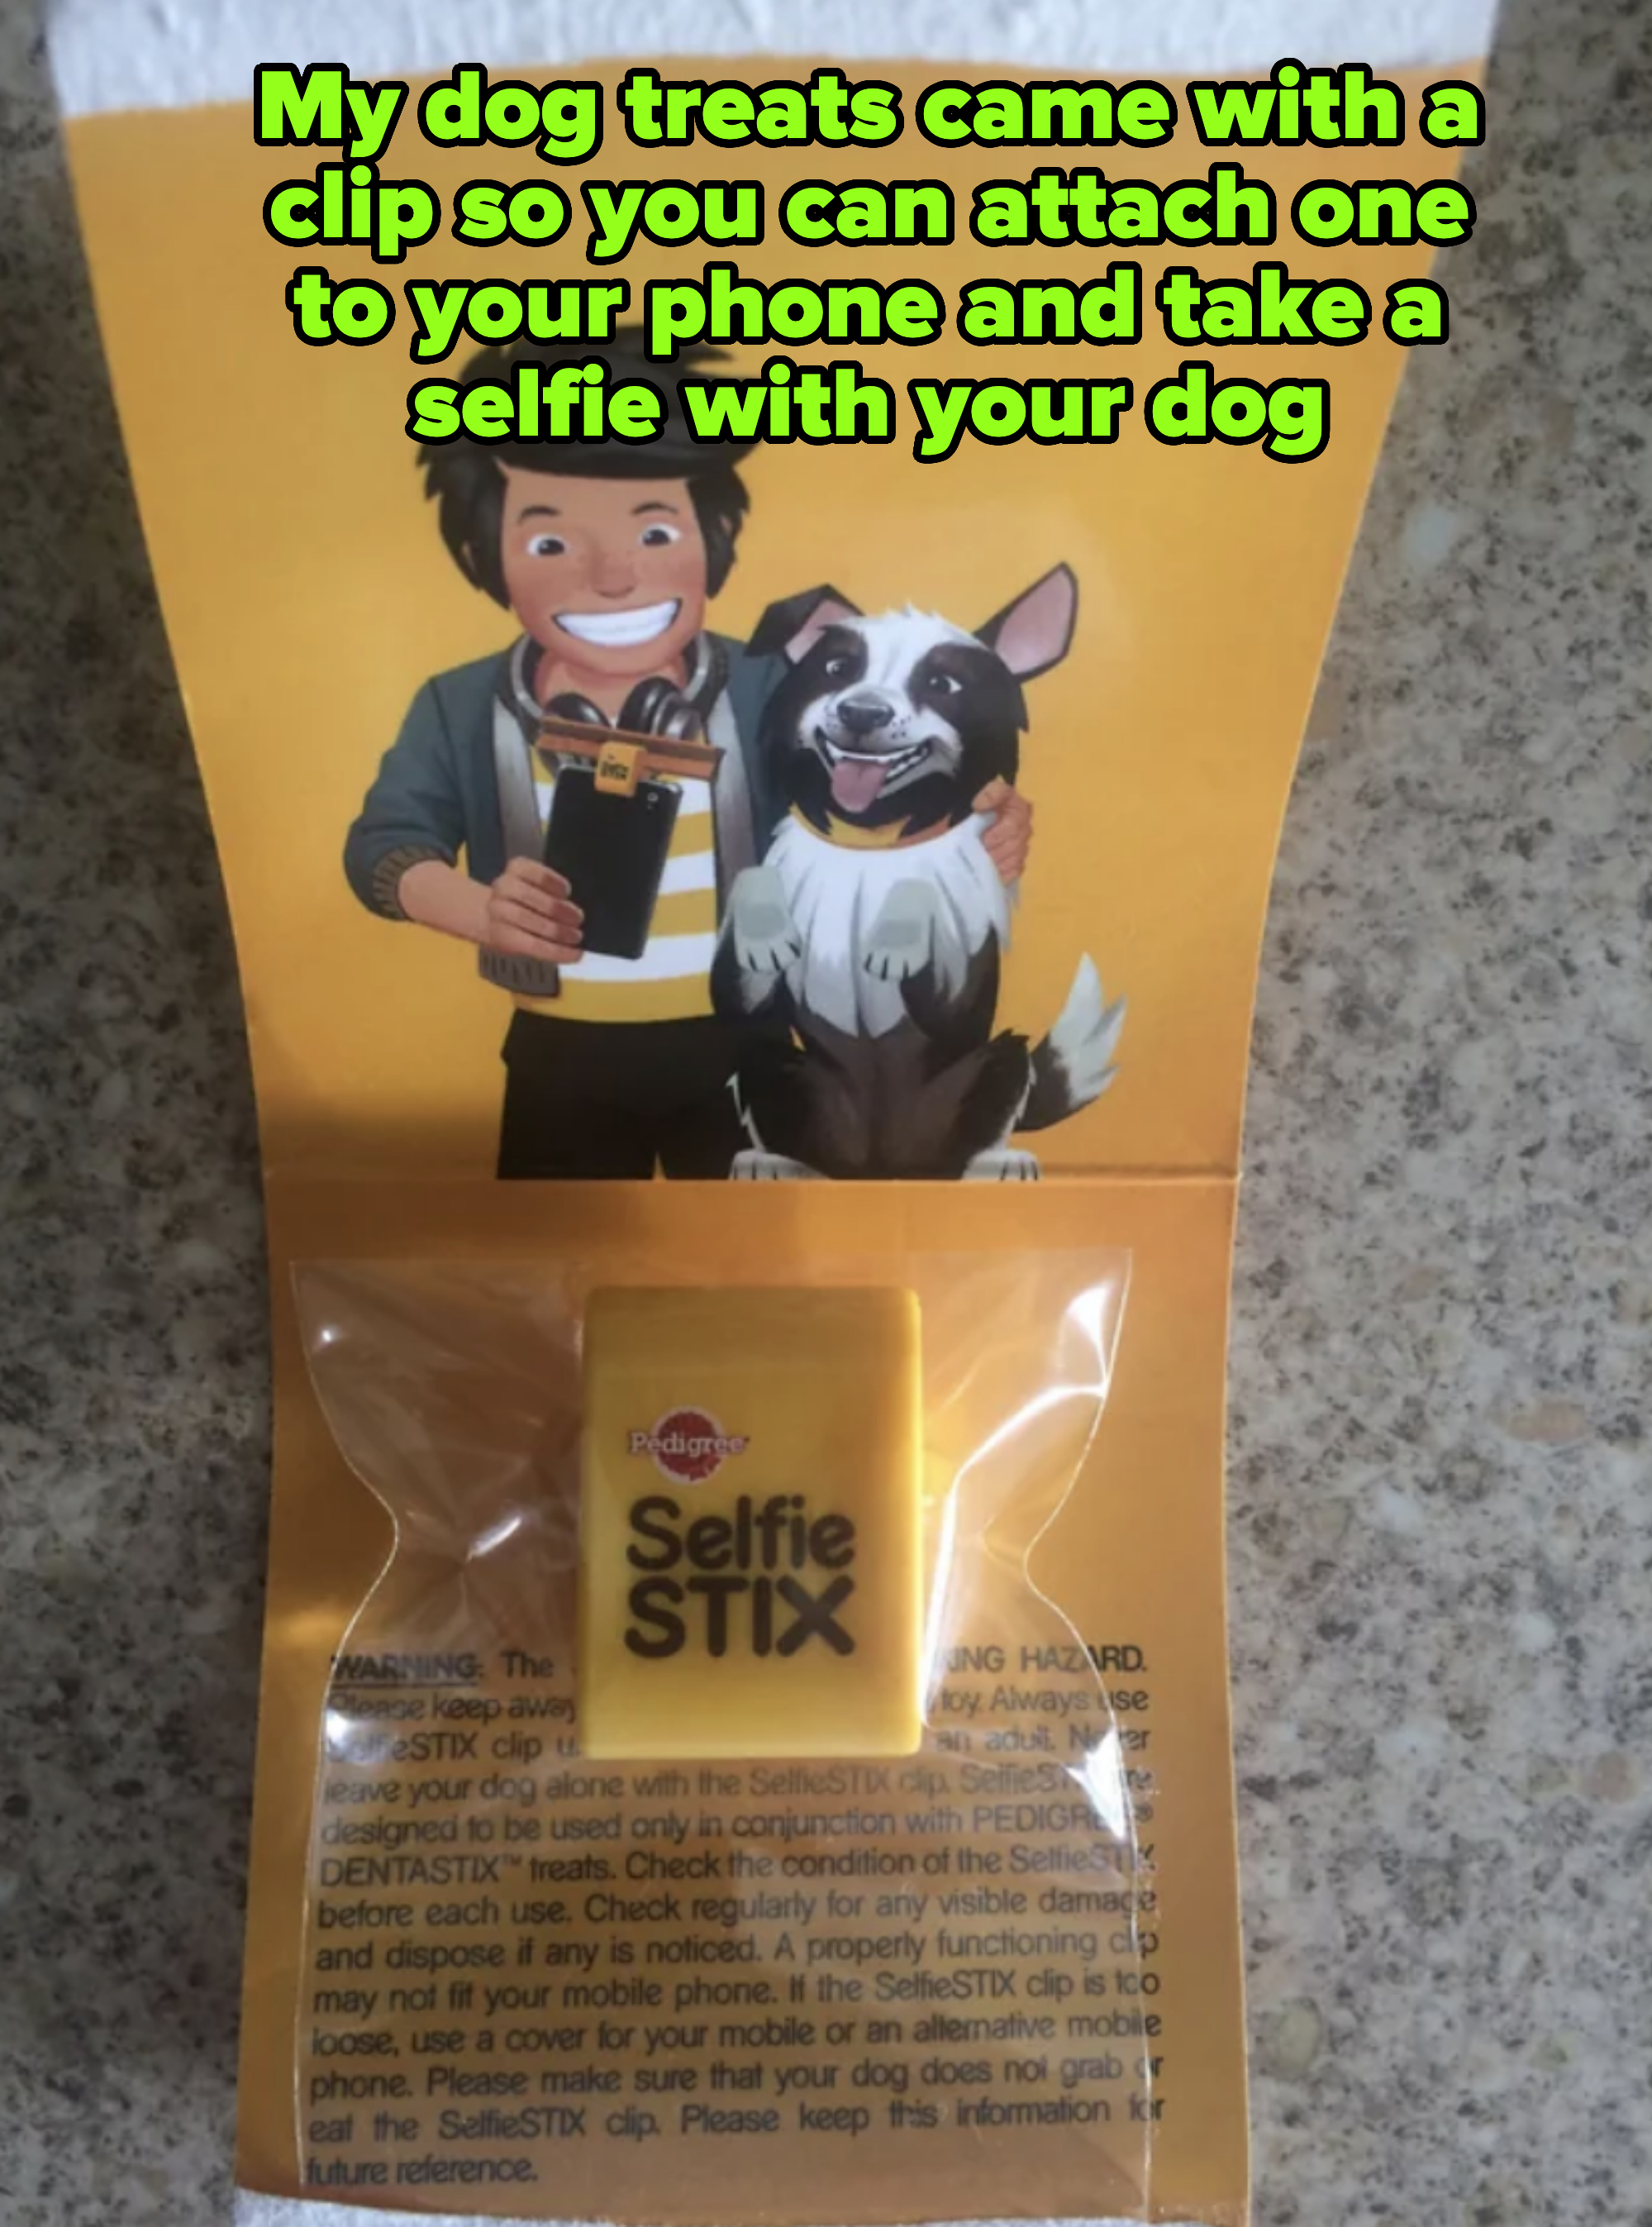 Animated characters, boy with clipboard and dog with stick, on a Selfie STIX pack. Text too extensive to summarize